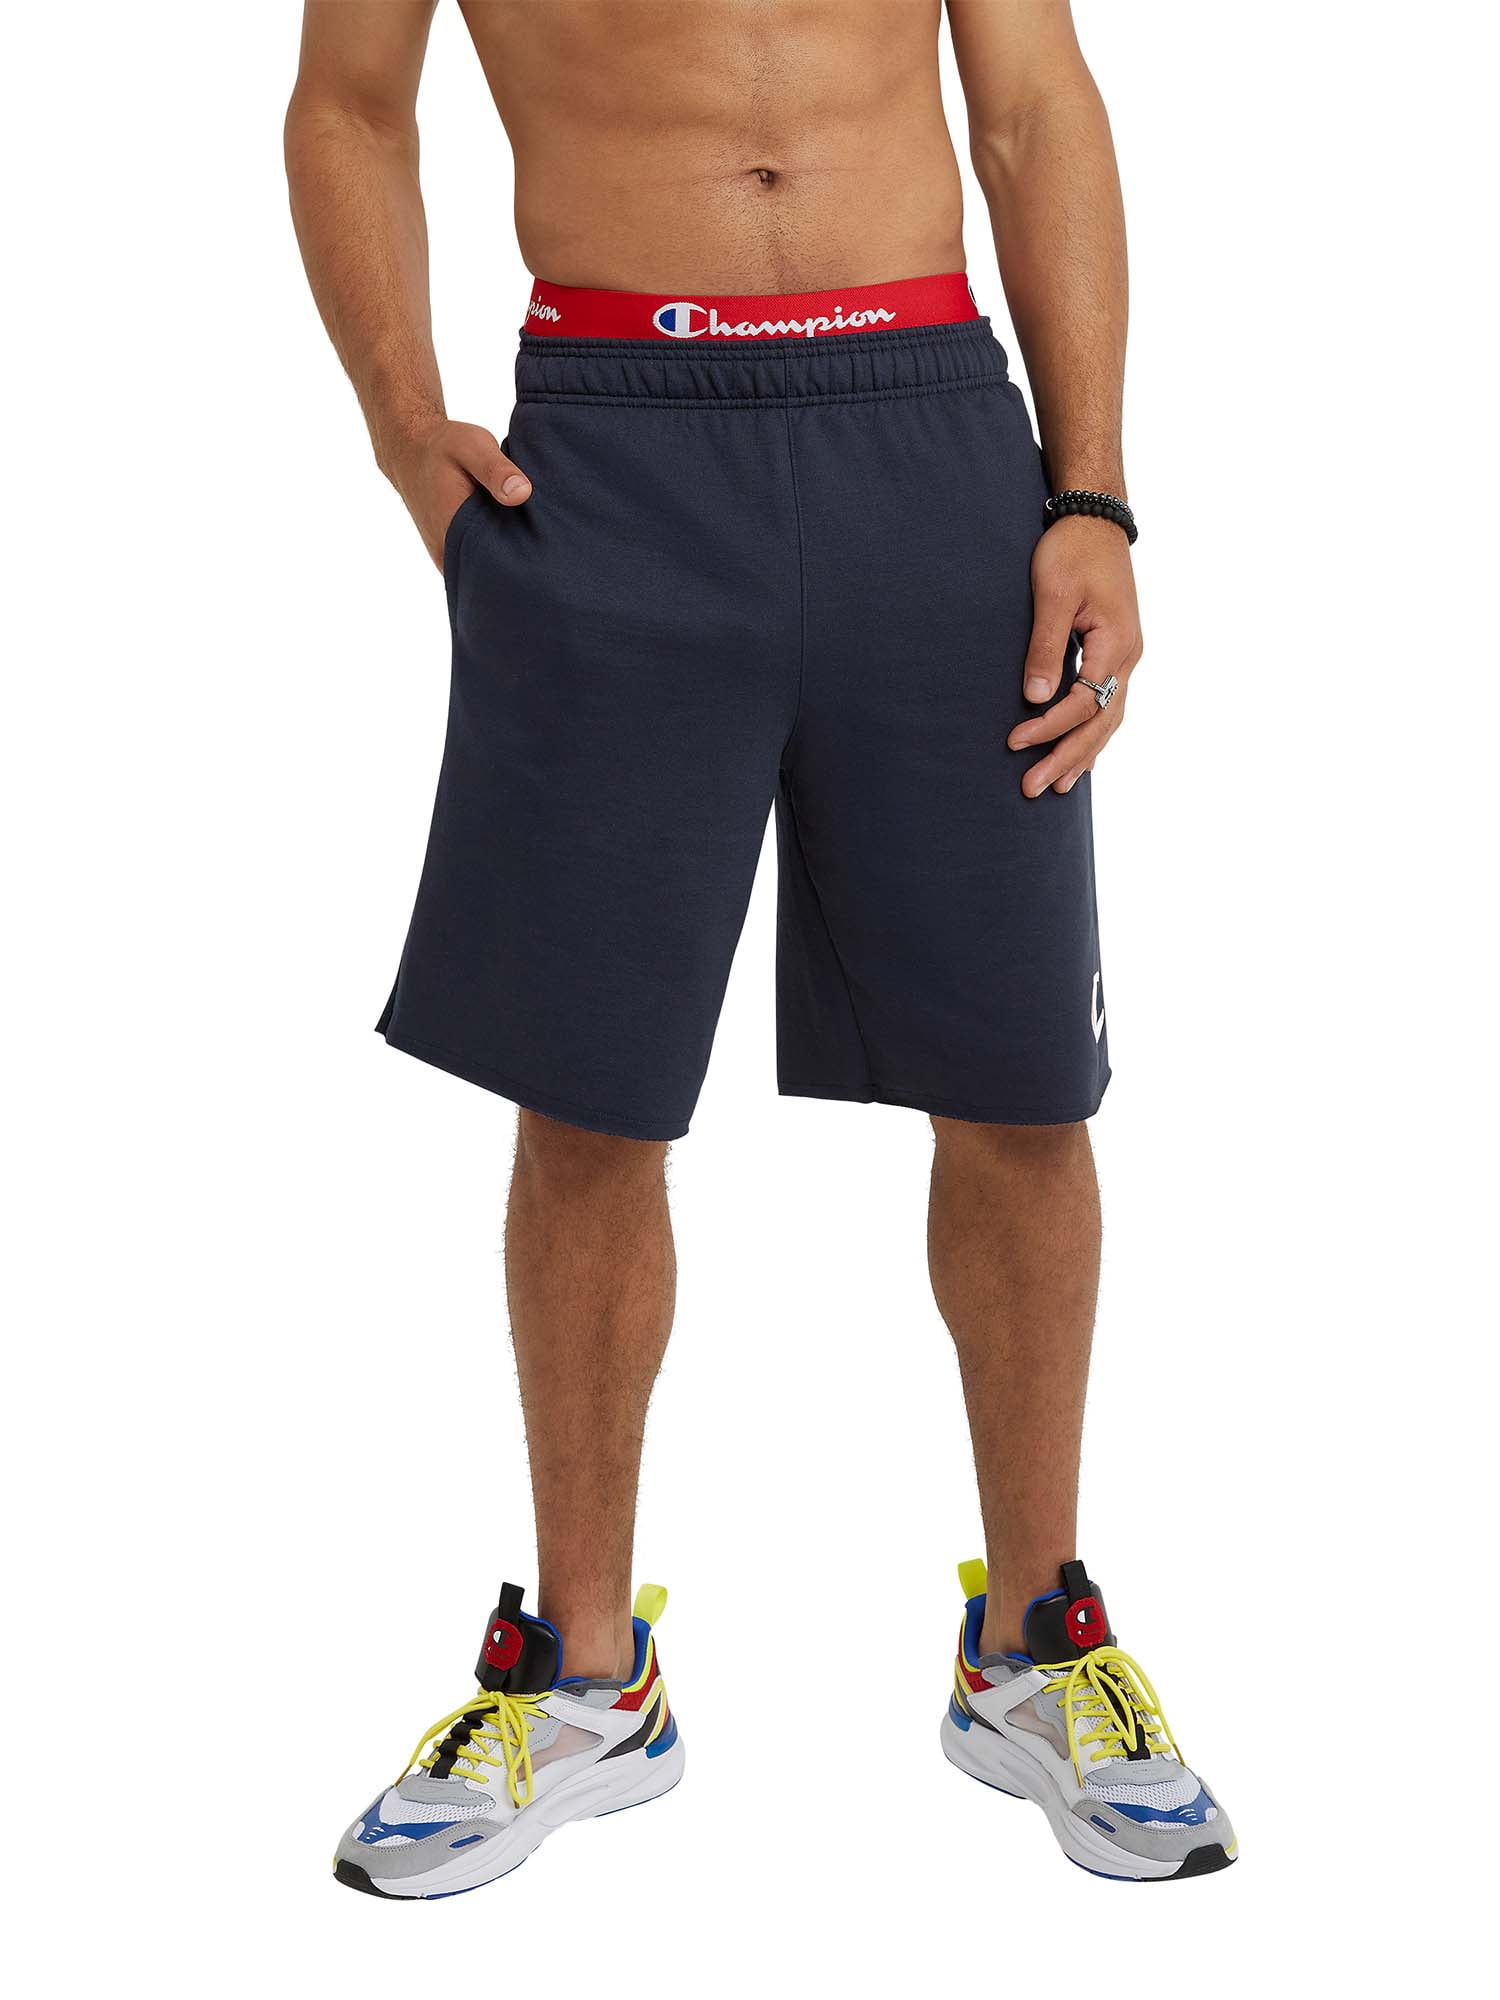 Be Your Own Champion Circle Men's Athletics Power Powerblend Fleece Shorts 